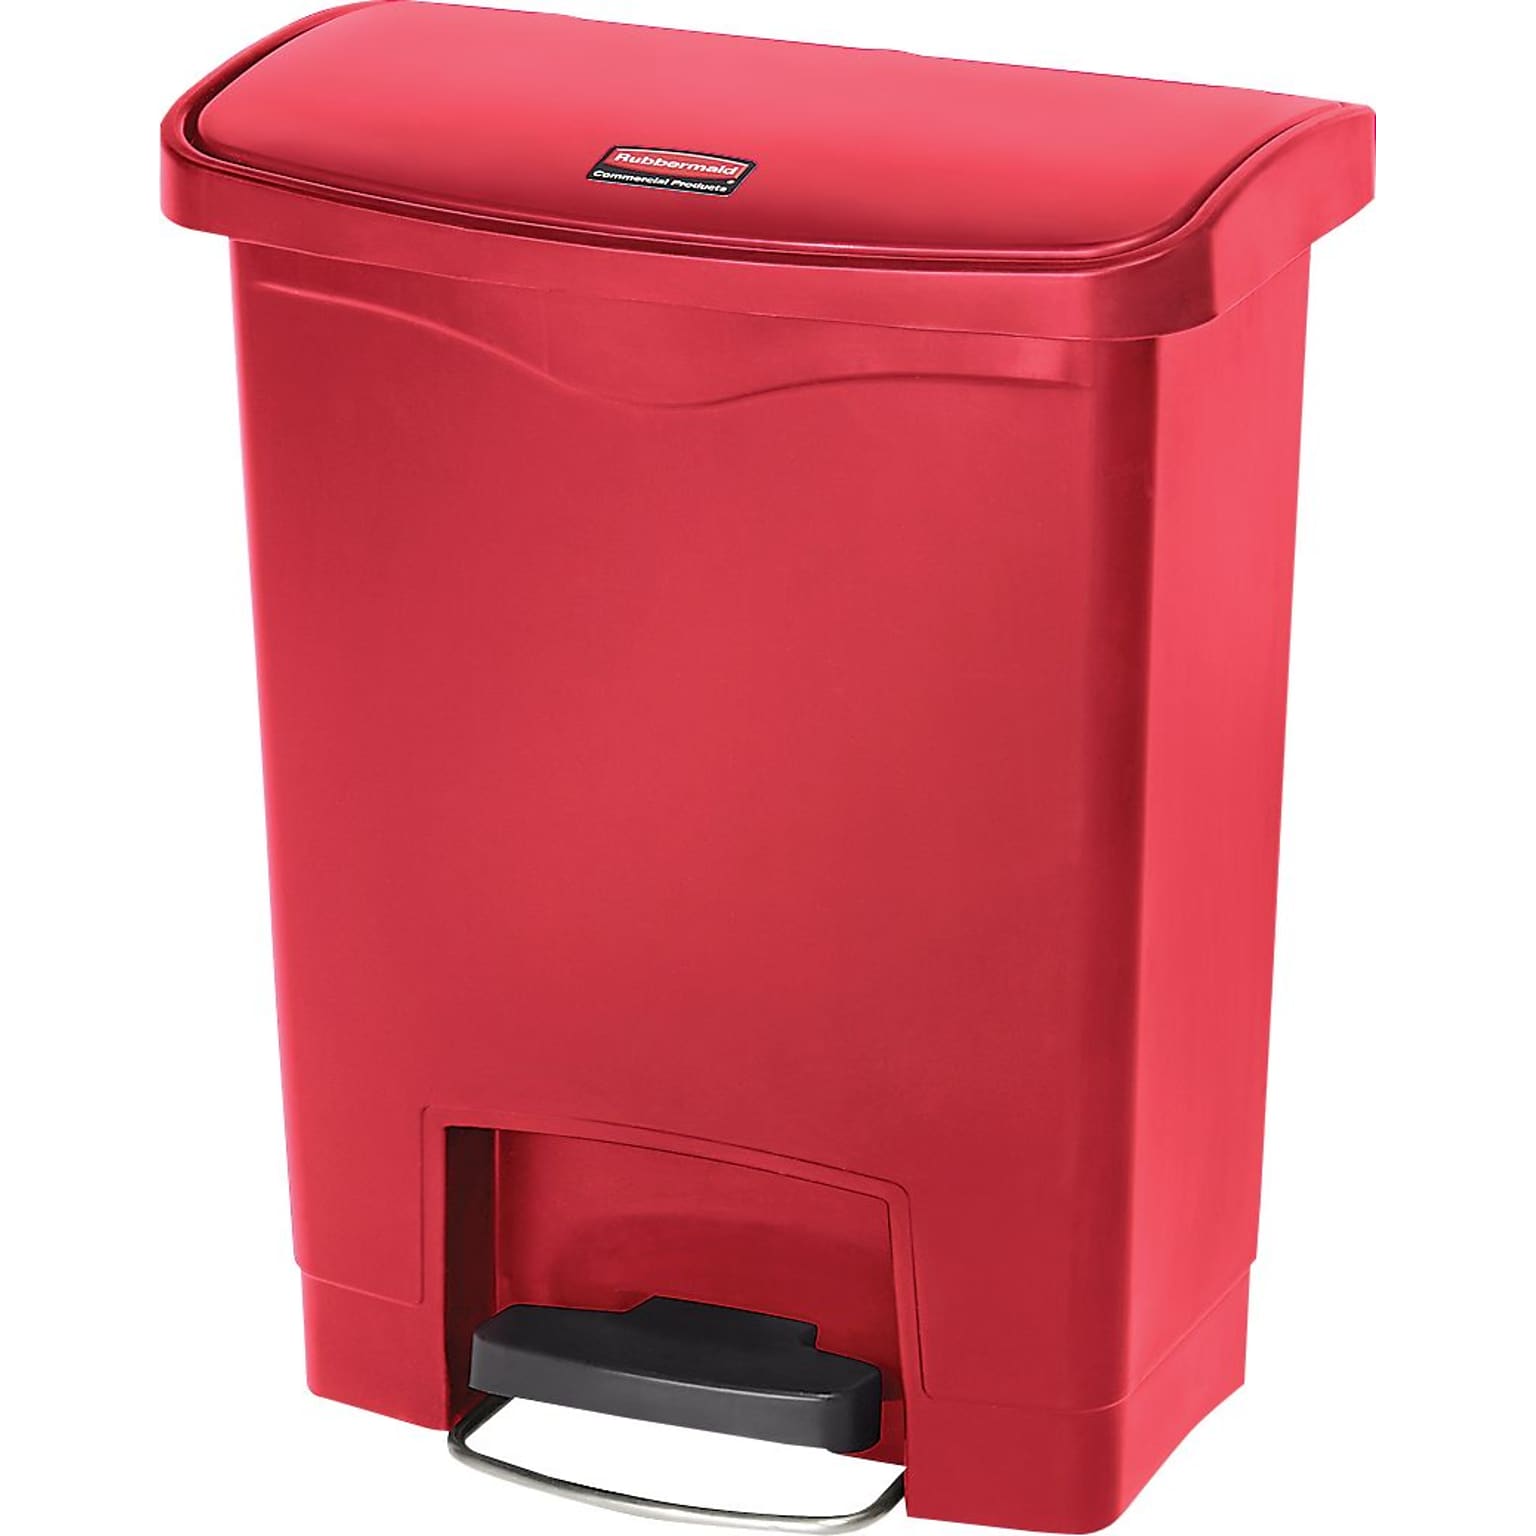 Rubbermaid Slim Jim Resin Front Step-On Trash Can, 8 Gallons, Red (1883564)